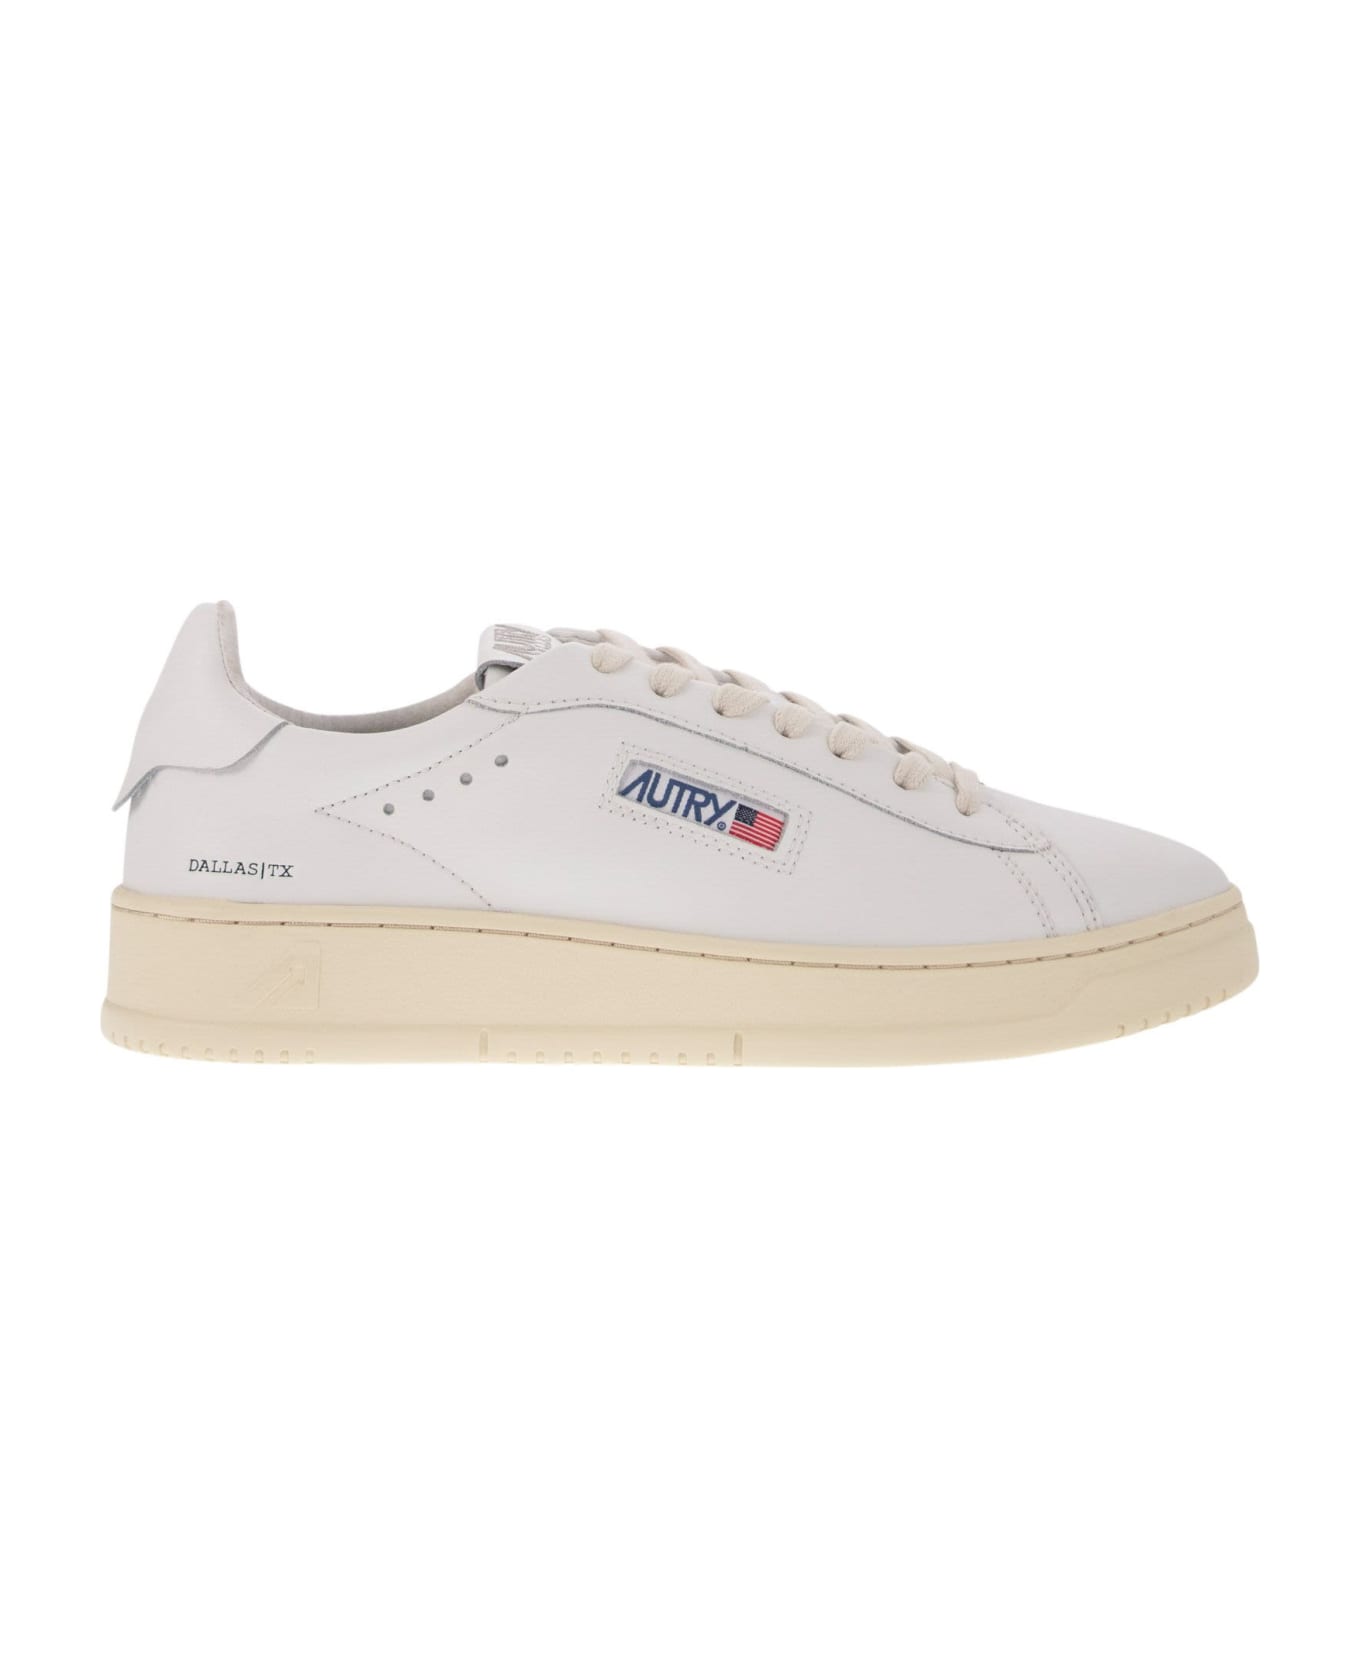 Autry Dallas Low Sneakers In White Leather - White